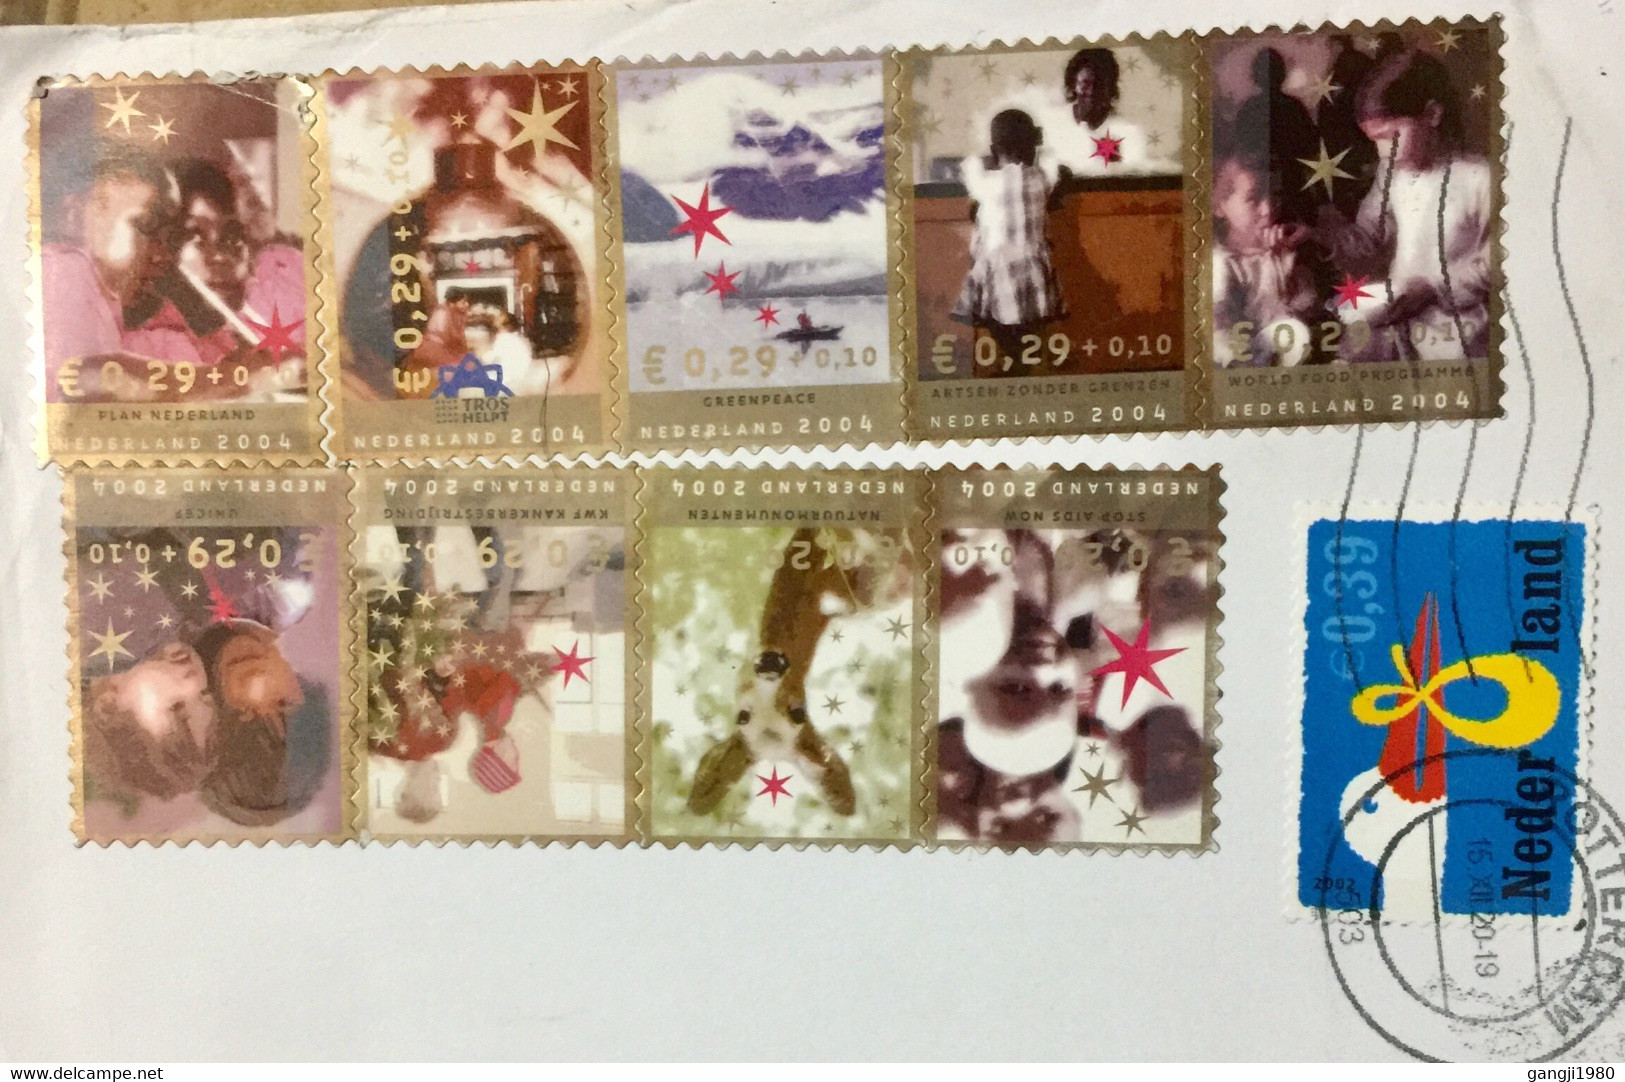 NETHERLANDS 2021, USED AIRMAIL COVER TO INDIA 10 STAMPS USED 2004, SELF ADHESIVE 8 STAMPS WITHOUT ROTTERDAM CANCELLATION - Storia Postale